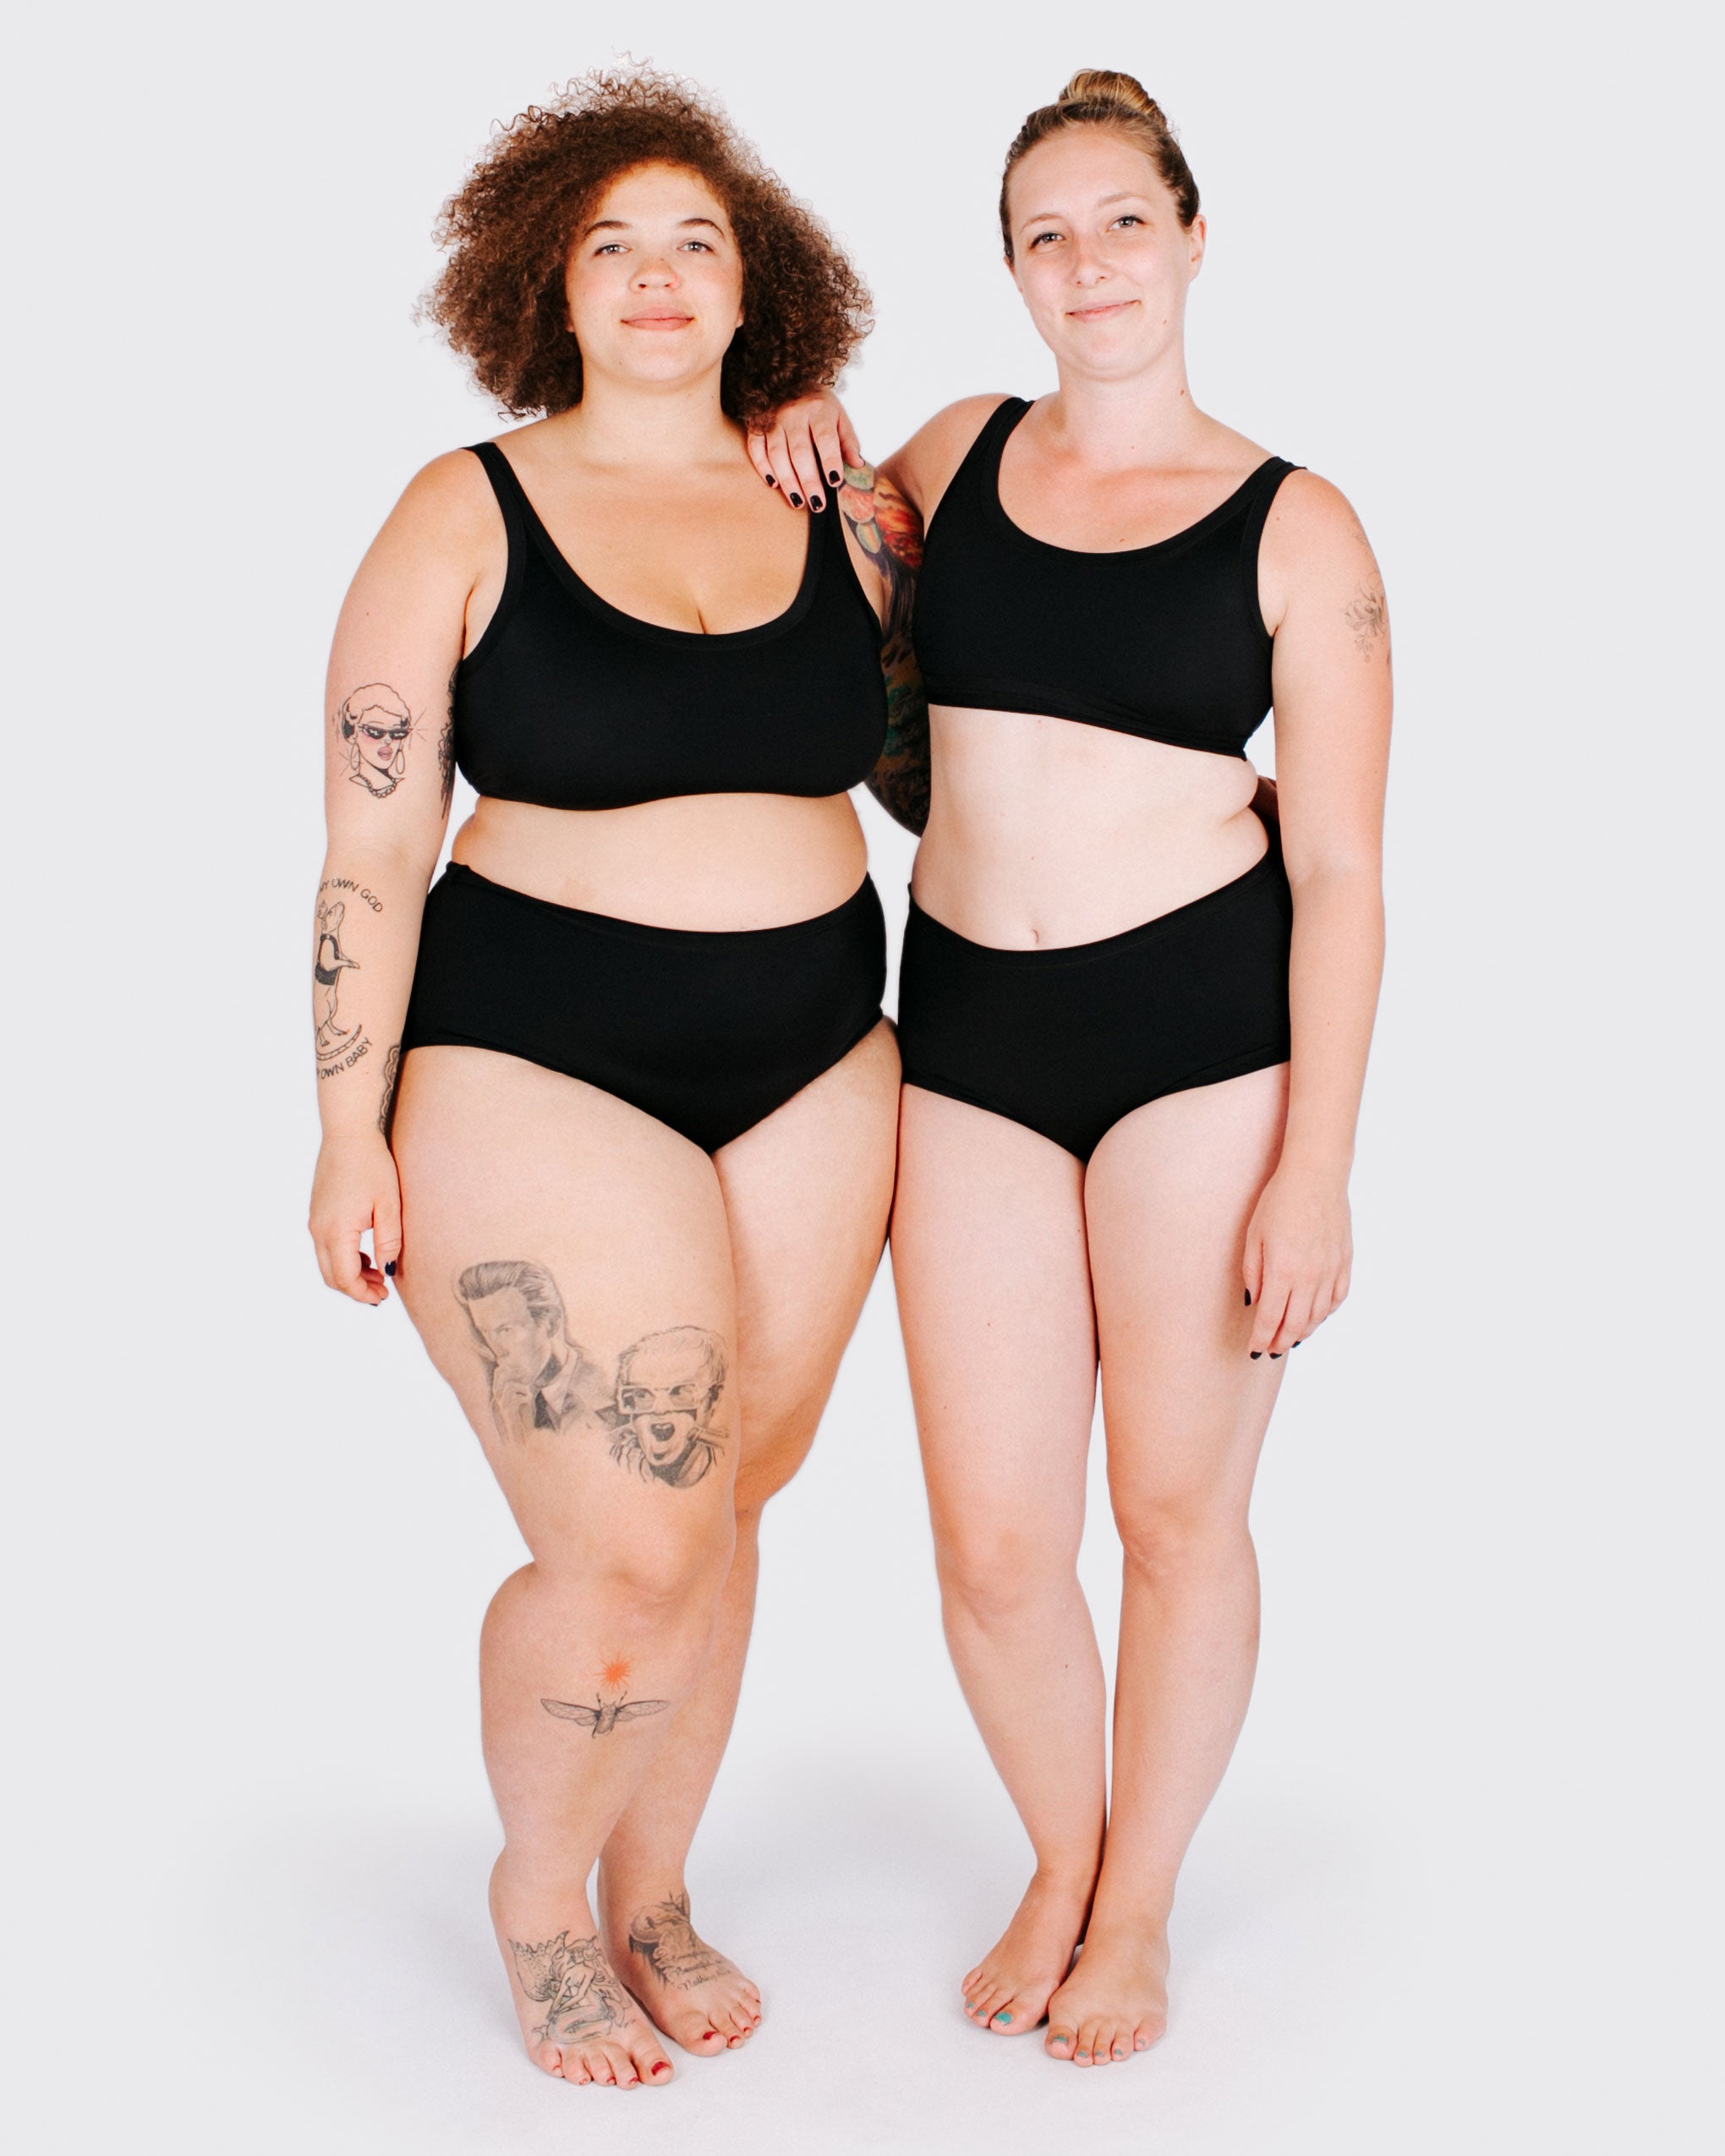 Fit photo from the front of Thunderpants recycled nylon Swimwear Original style bottoms and Swimwear Top in Plain Black on two models standing together.